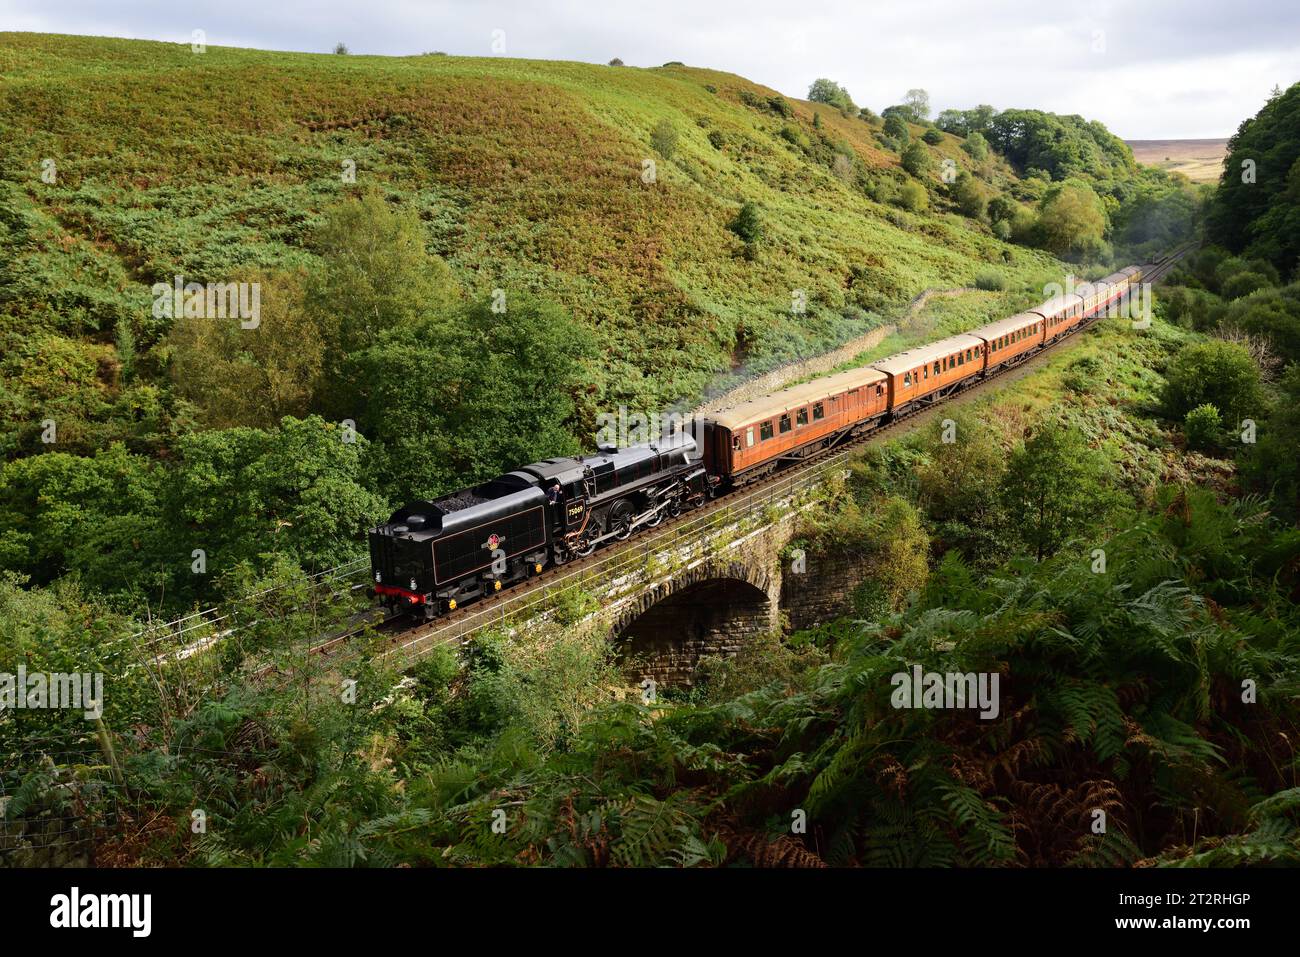 Running tender first, BR Standard Class 4 No 75069 coasts downhill at Water Arc near Goathland on the North Yorkshire Moors Railway. Stock Photo